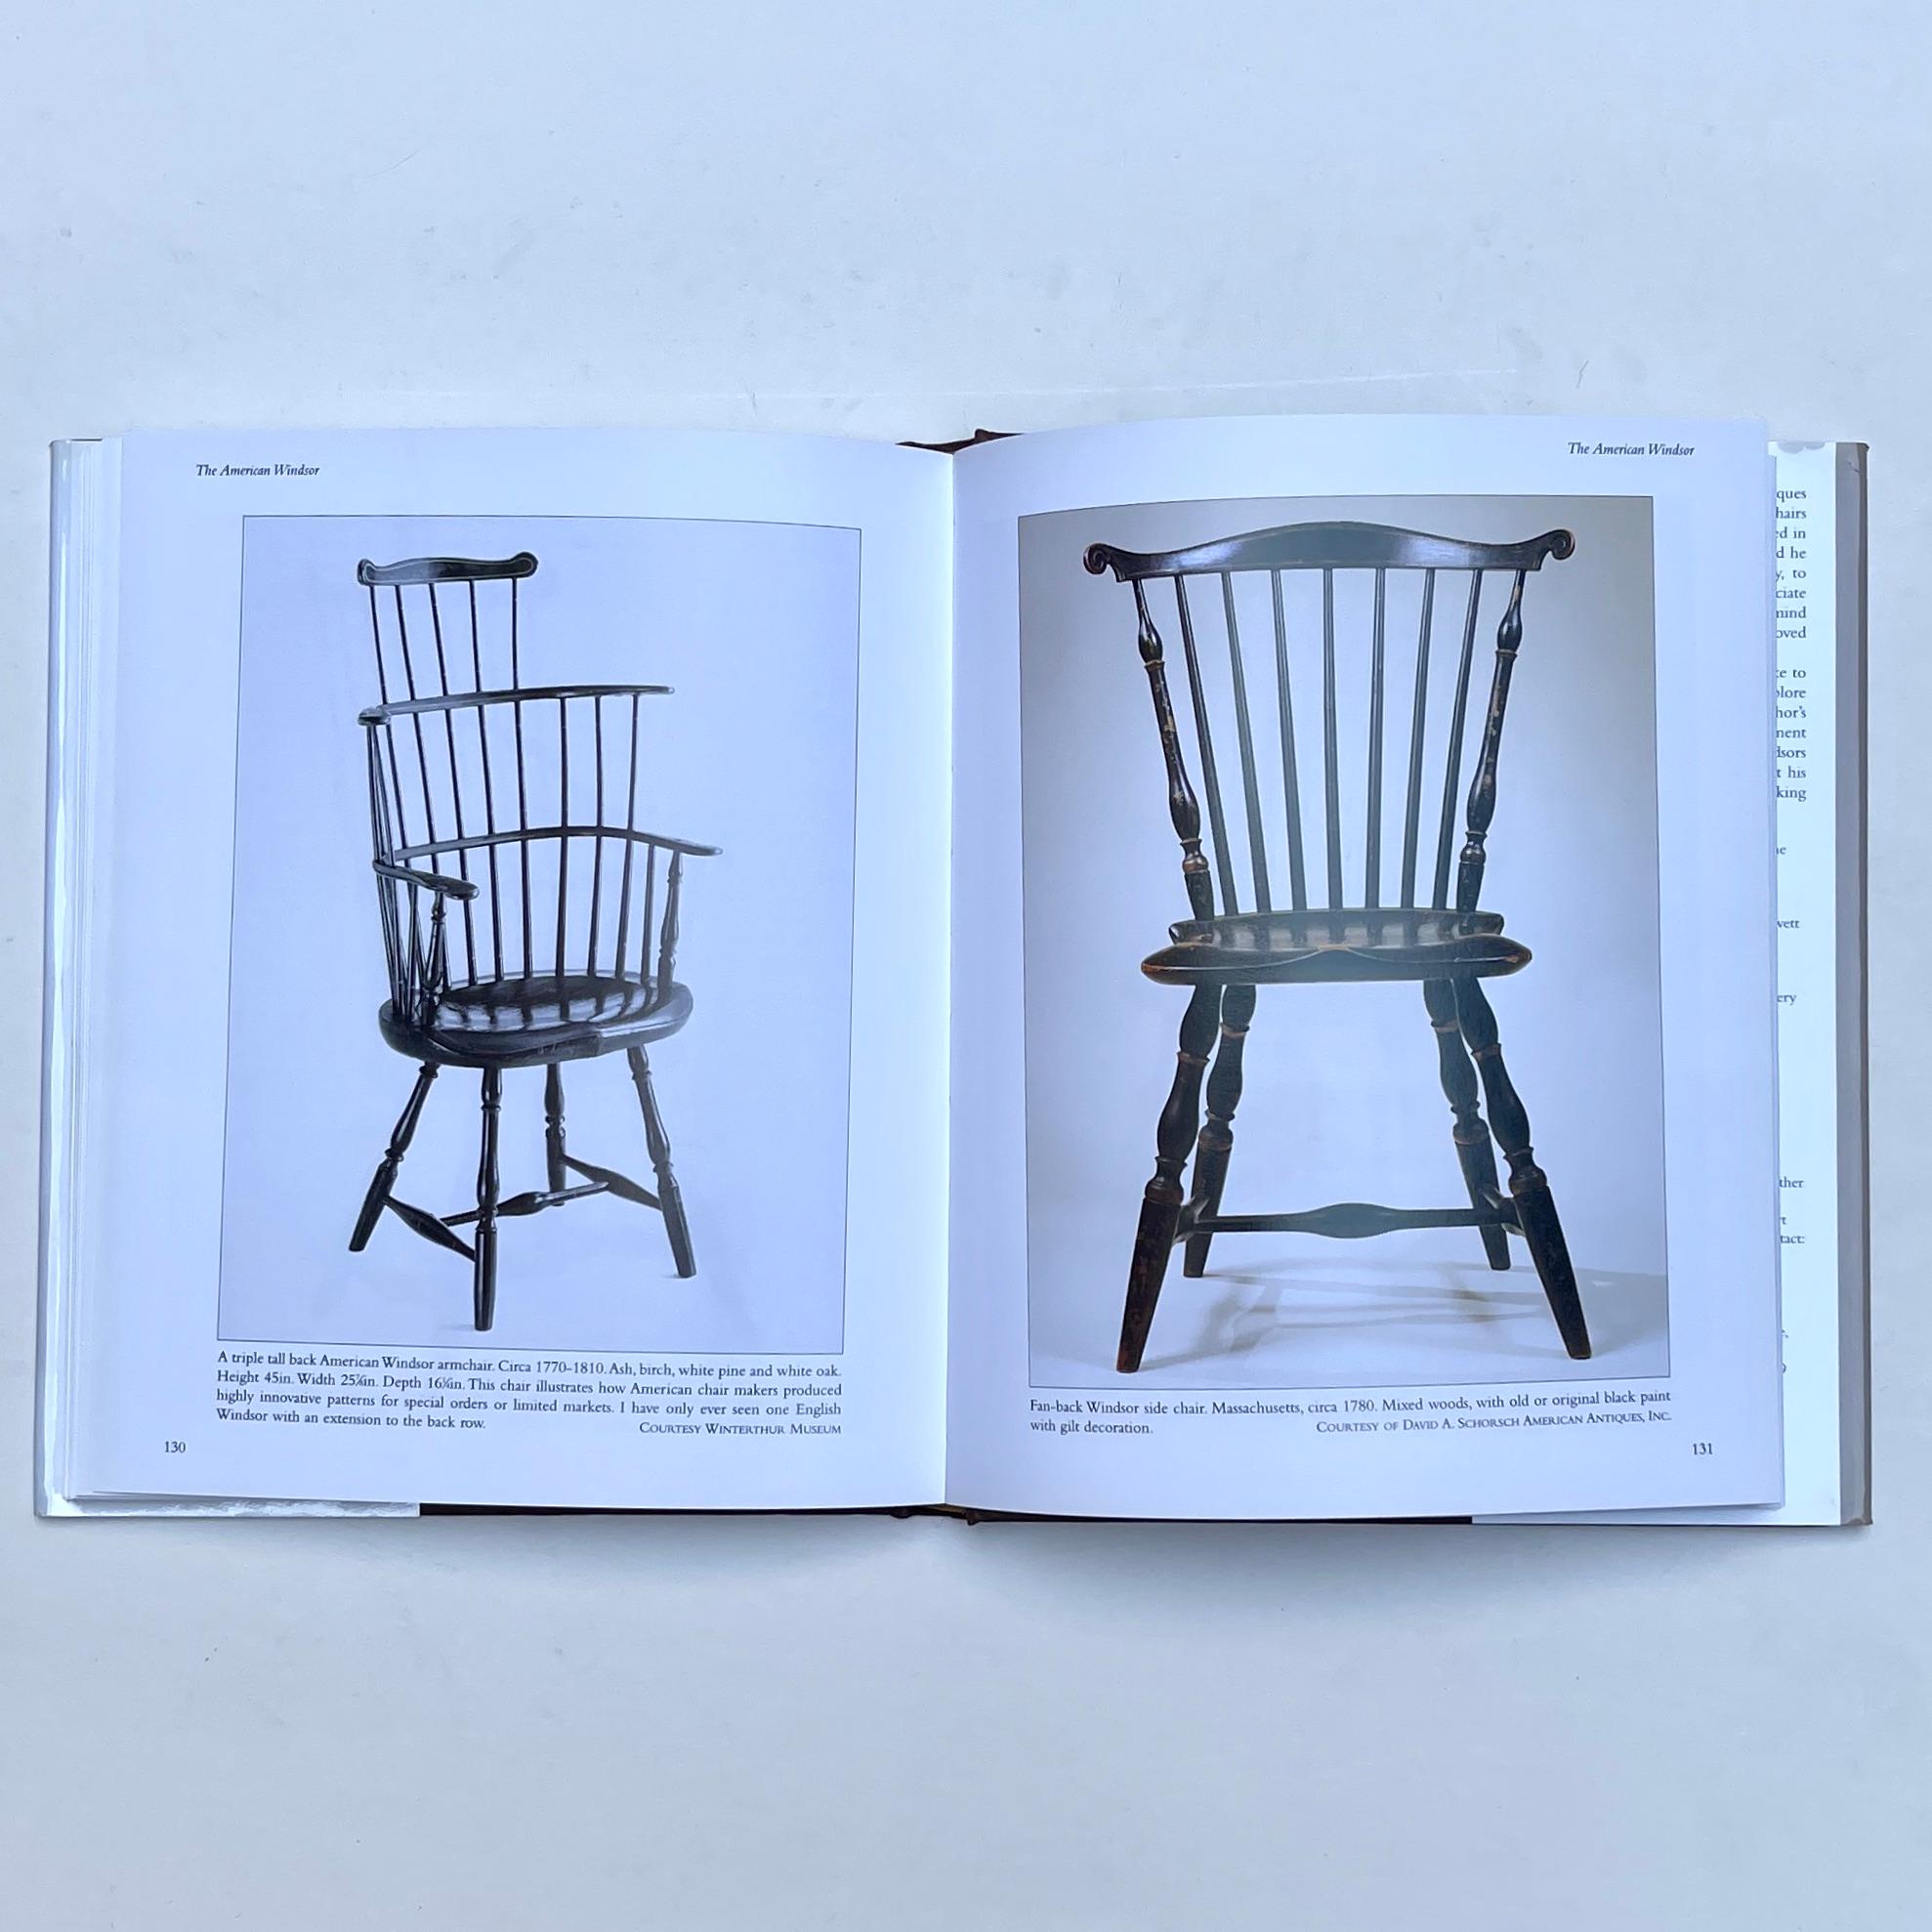 British Windsor Chairs, An Illustrated Celebration, Michael Harding-Hill